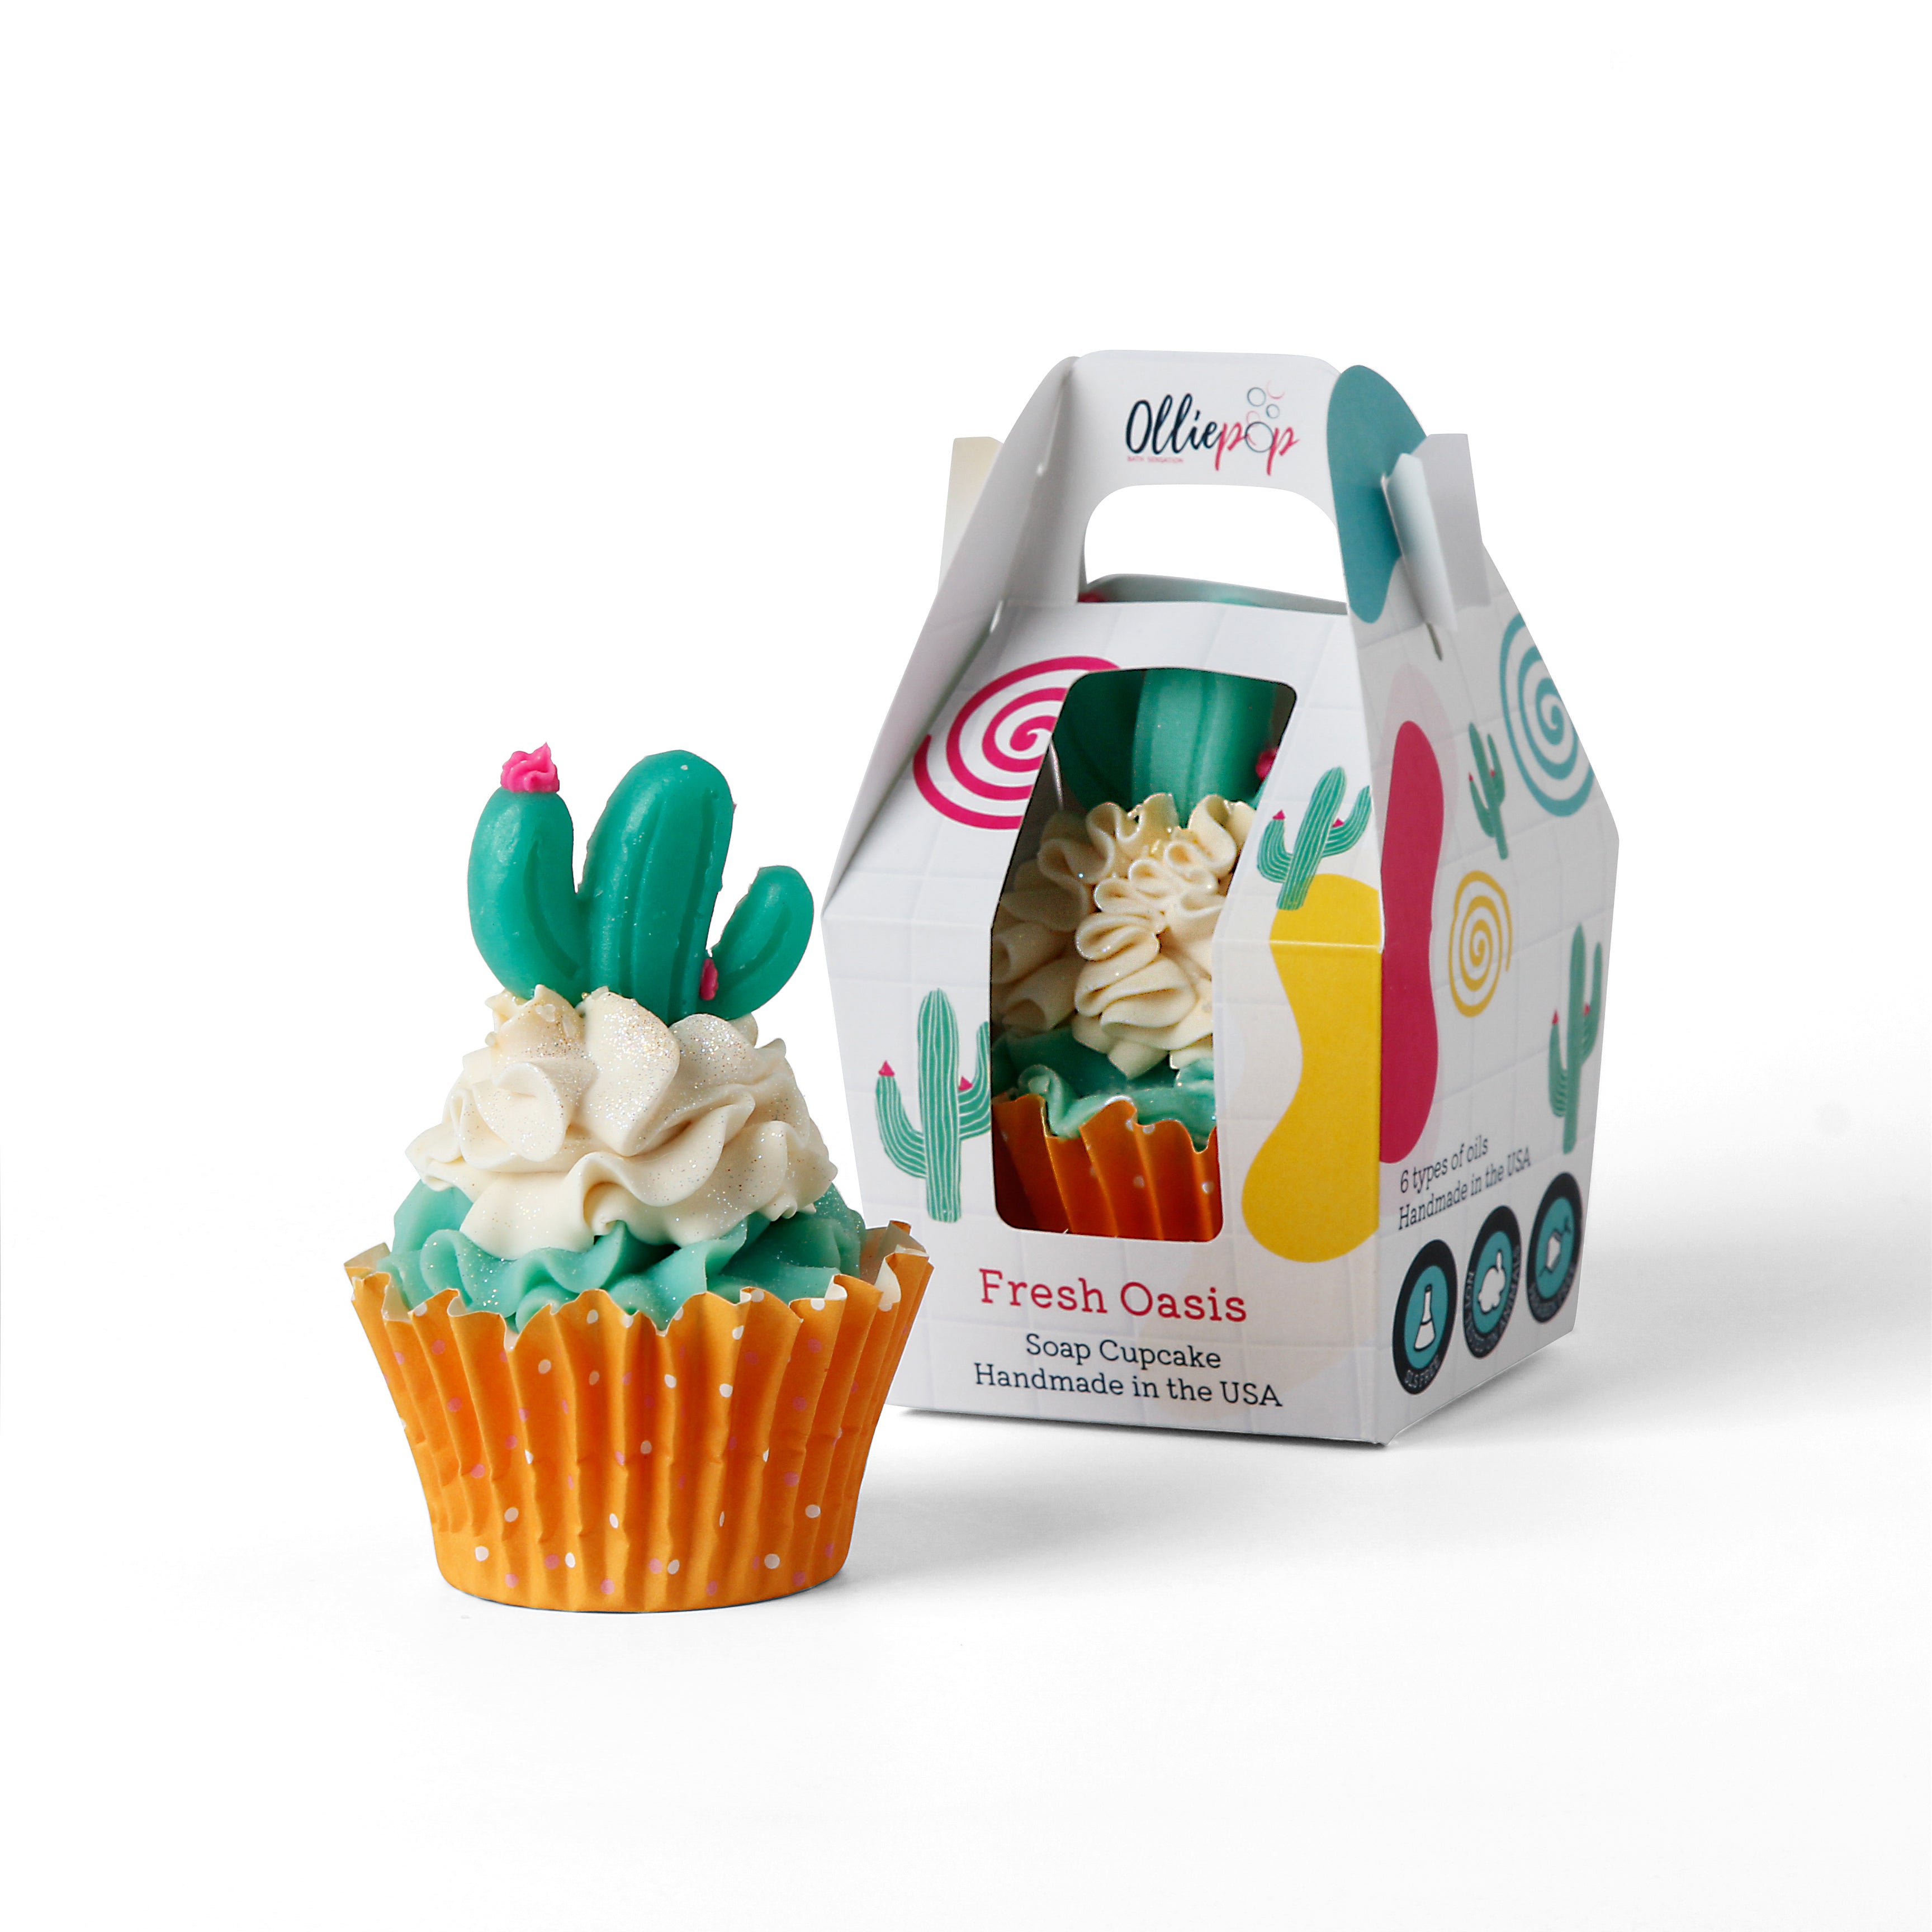 Cactus themed soap cupcake. Packaged with our customized Olliepop packaging that is perfect for gifts.